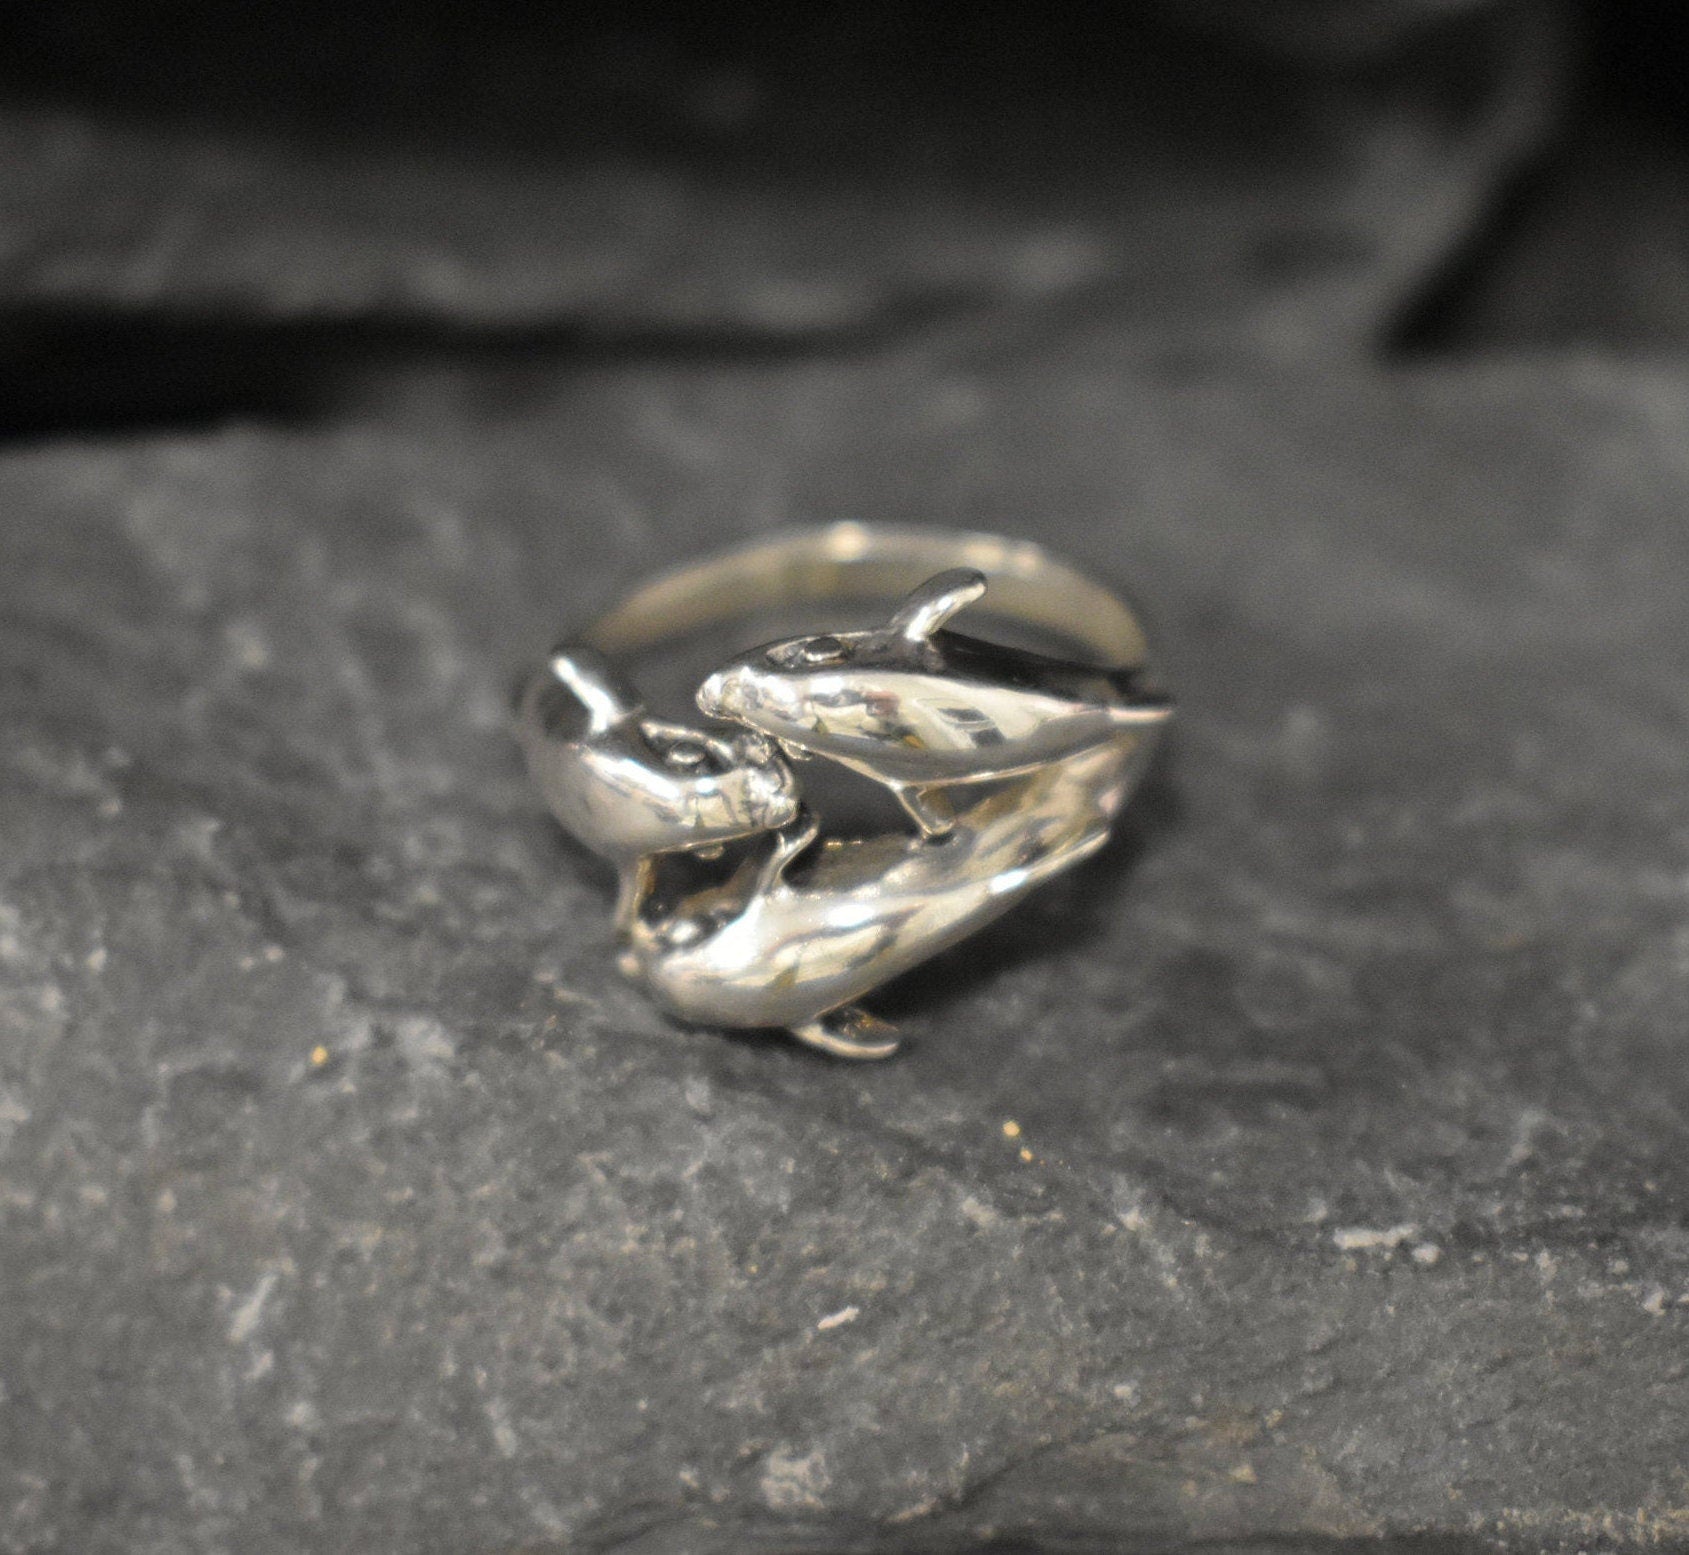 Dolphin Ring, Silver Dolphin Ring, Solid Silver Ring, Small Dolphin Ring, Animal Ring, Silver Artistic Ring, Sterling Silver Ring, Silver